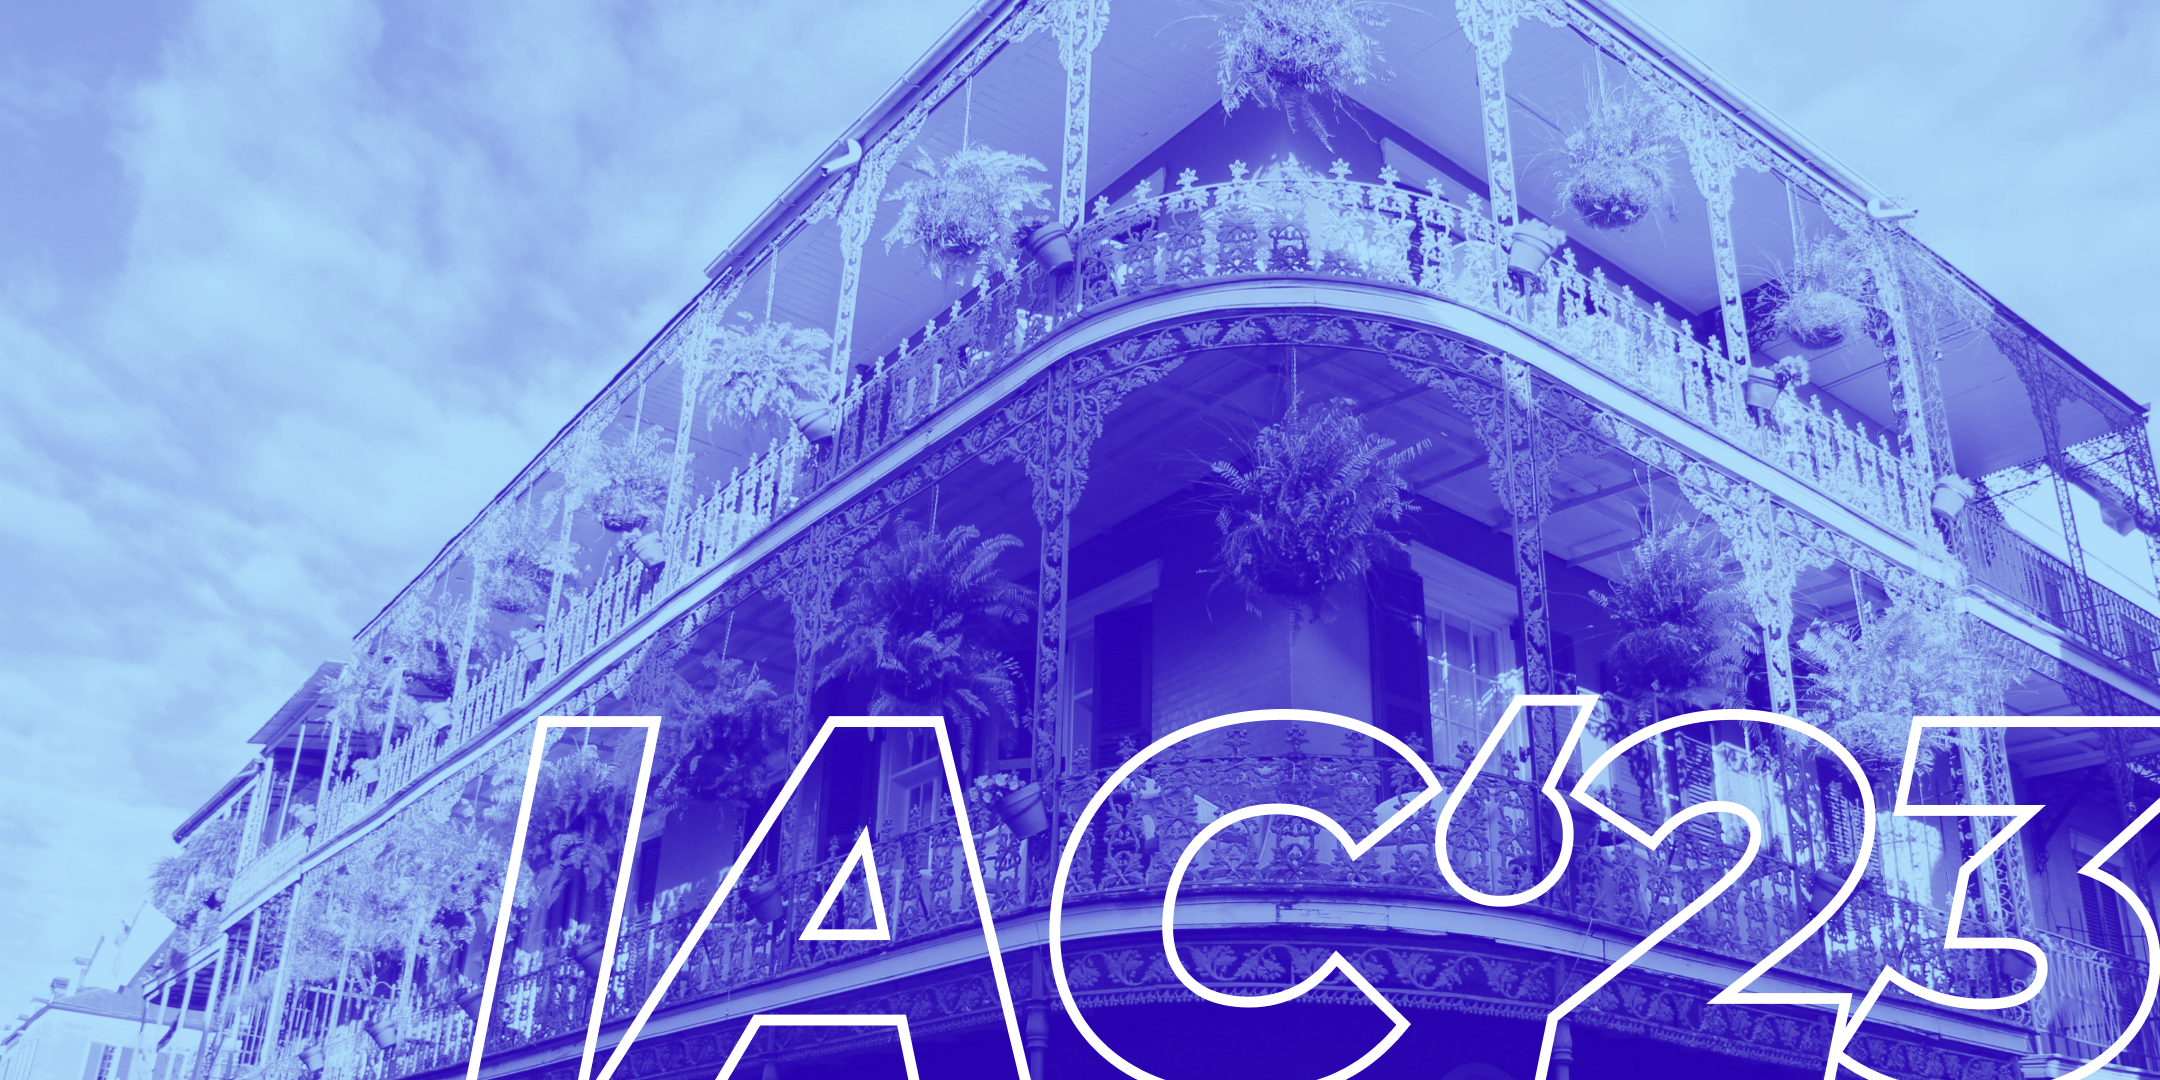 IAC, an information architecture conference